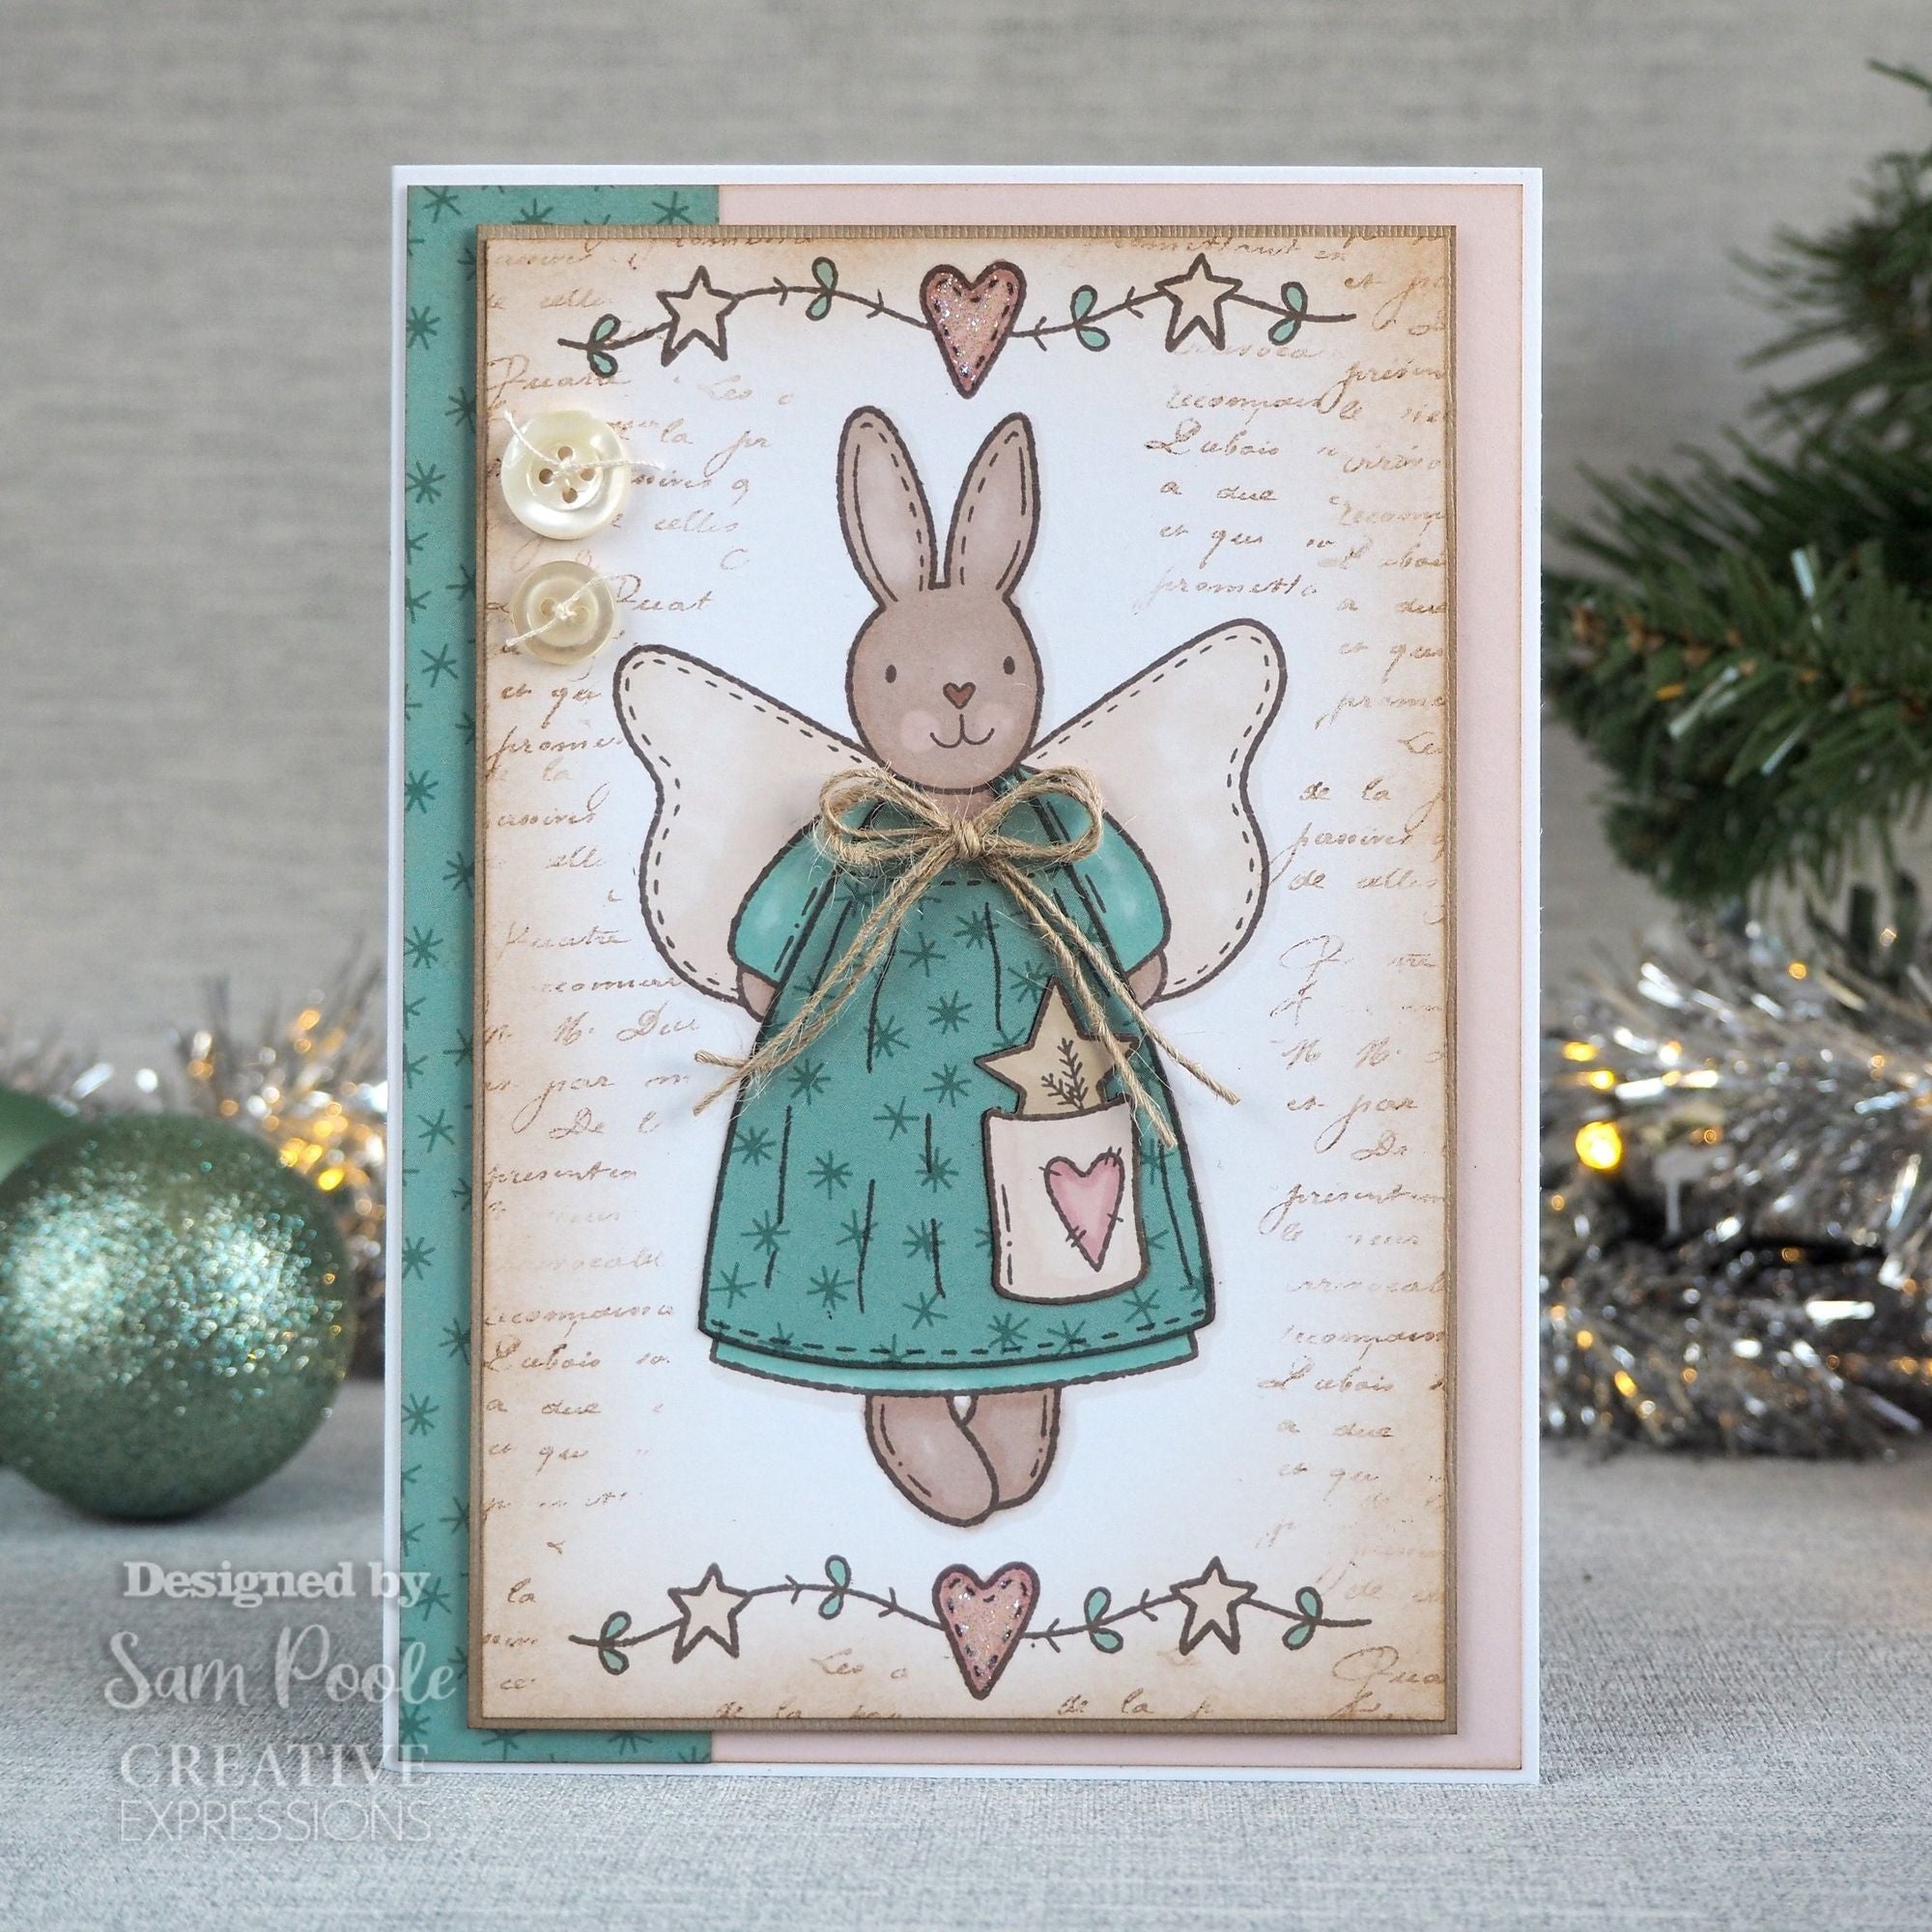 Creative Expressions Sam Poole Angel Bunny 6 in x 4 in Clear Stamp Set